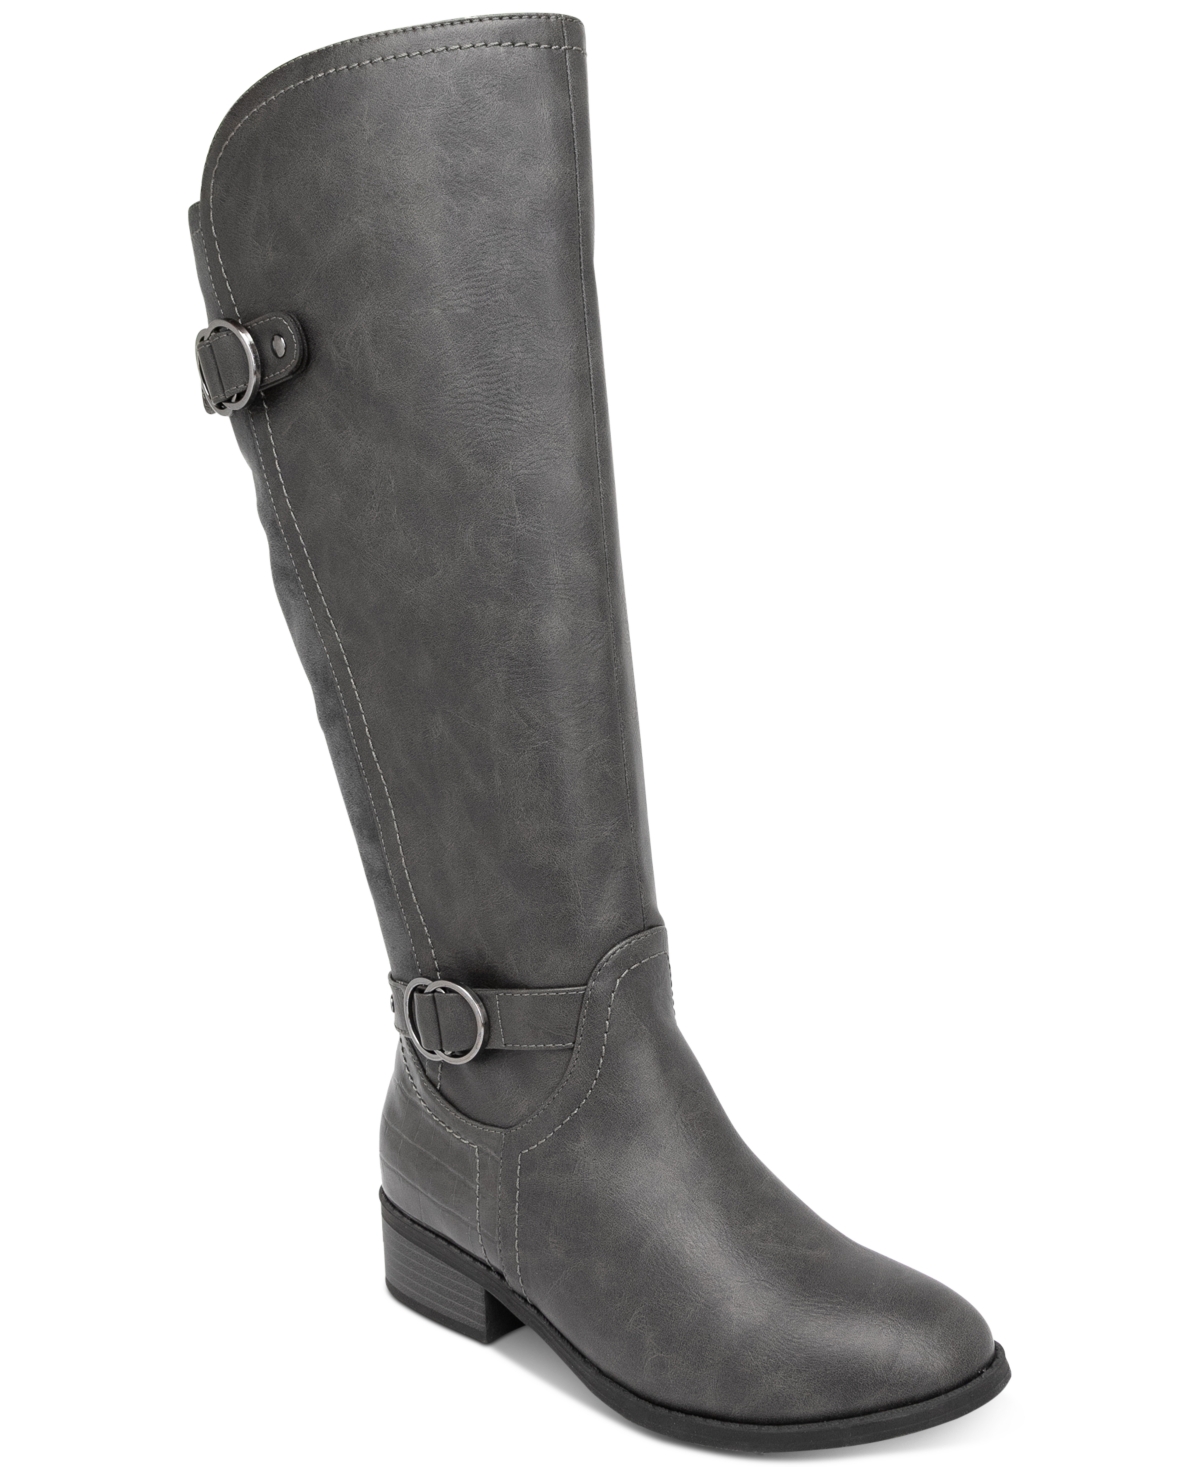 Leandraa Wide-Calf Riding Boots, Created for Macy's - Grey